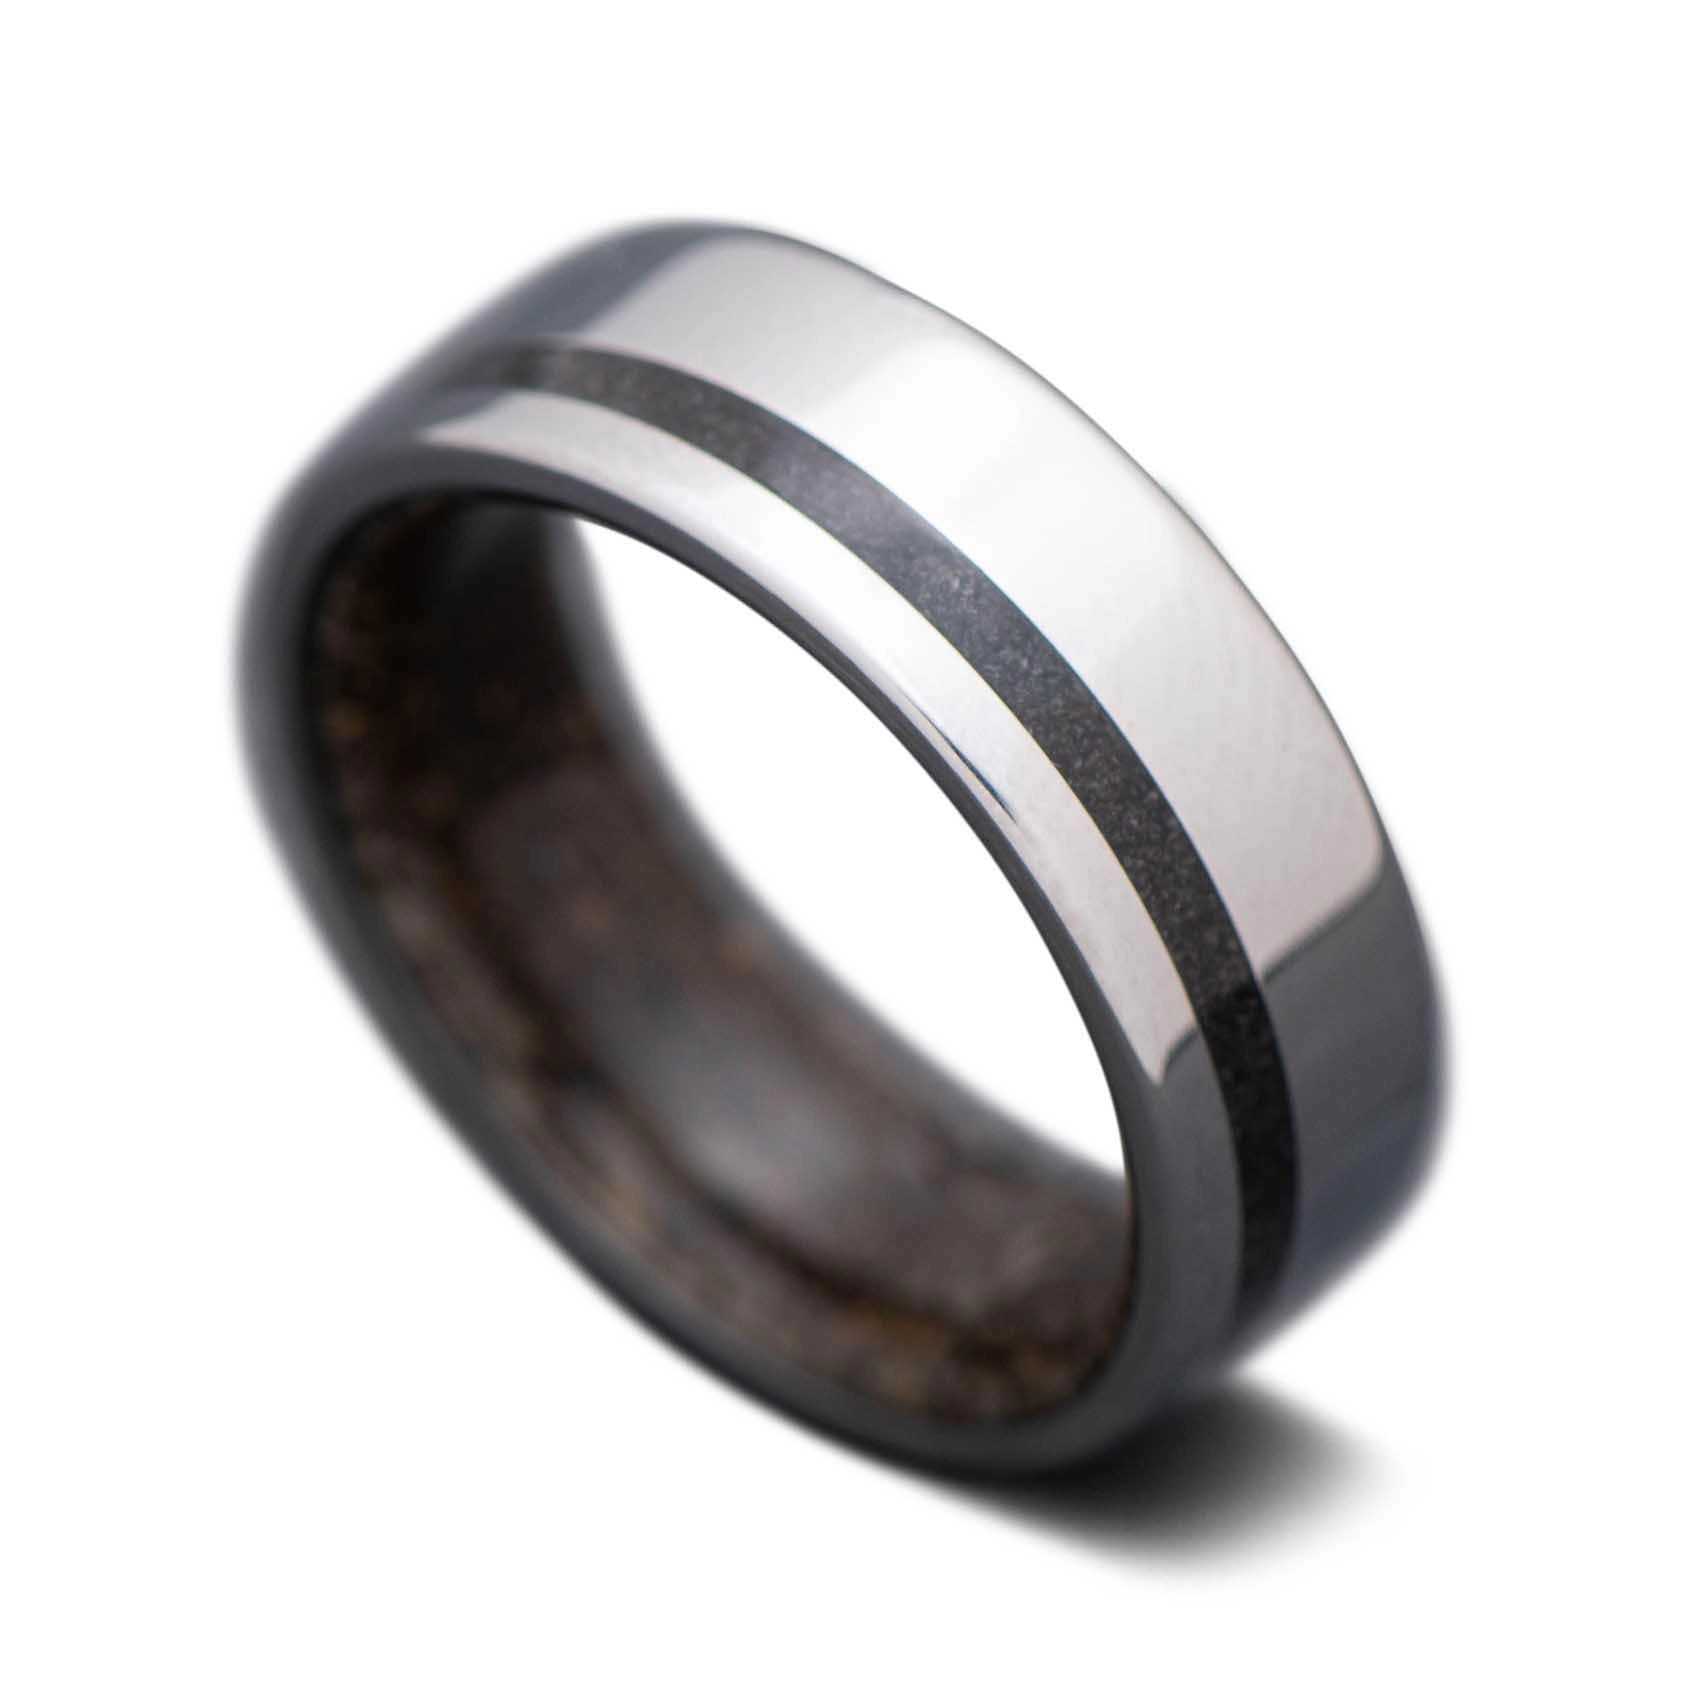 Titanium Core Ring with  Black Onyx inlay and T-Rex inner sleeve, 7mm -THE SHIFT